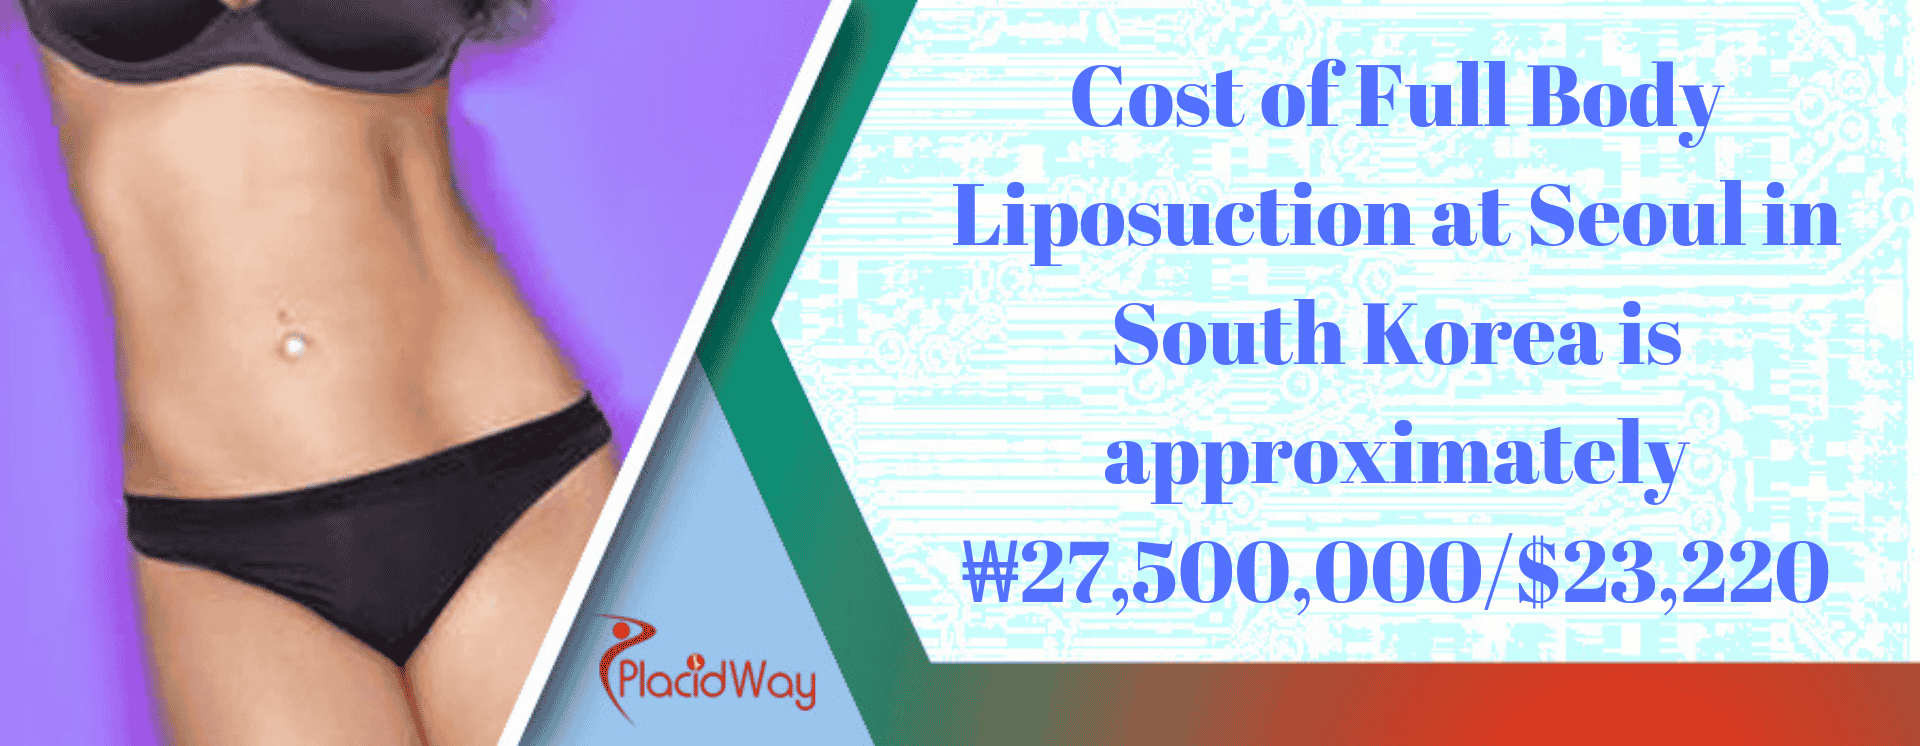 https://www.placidway.com/cdn-cgi/image/quality=30/https://www.placidway.com/editor_images/1558615498_Cost%20of%20Full%20Body%20Liposuction%20at%20Seoul%20in%20South%20Korea%20is%20approximately%20%E2%82%A927,500,000_$23,220.png